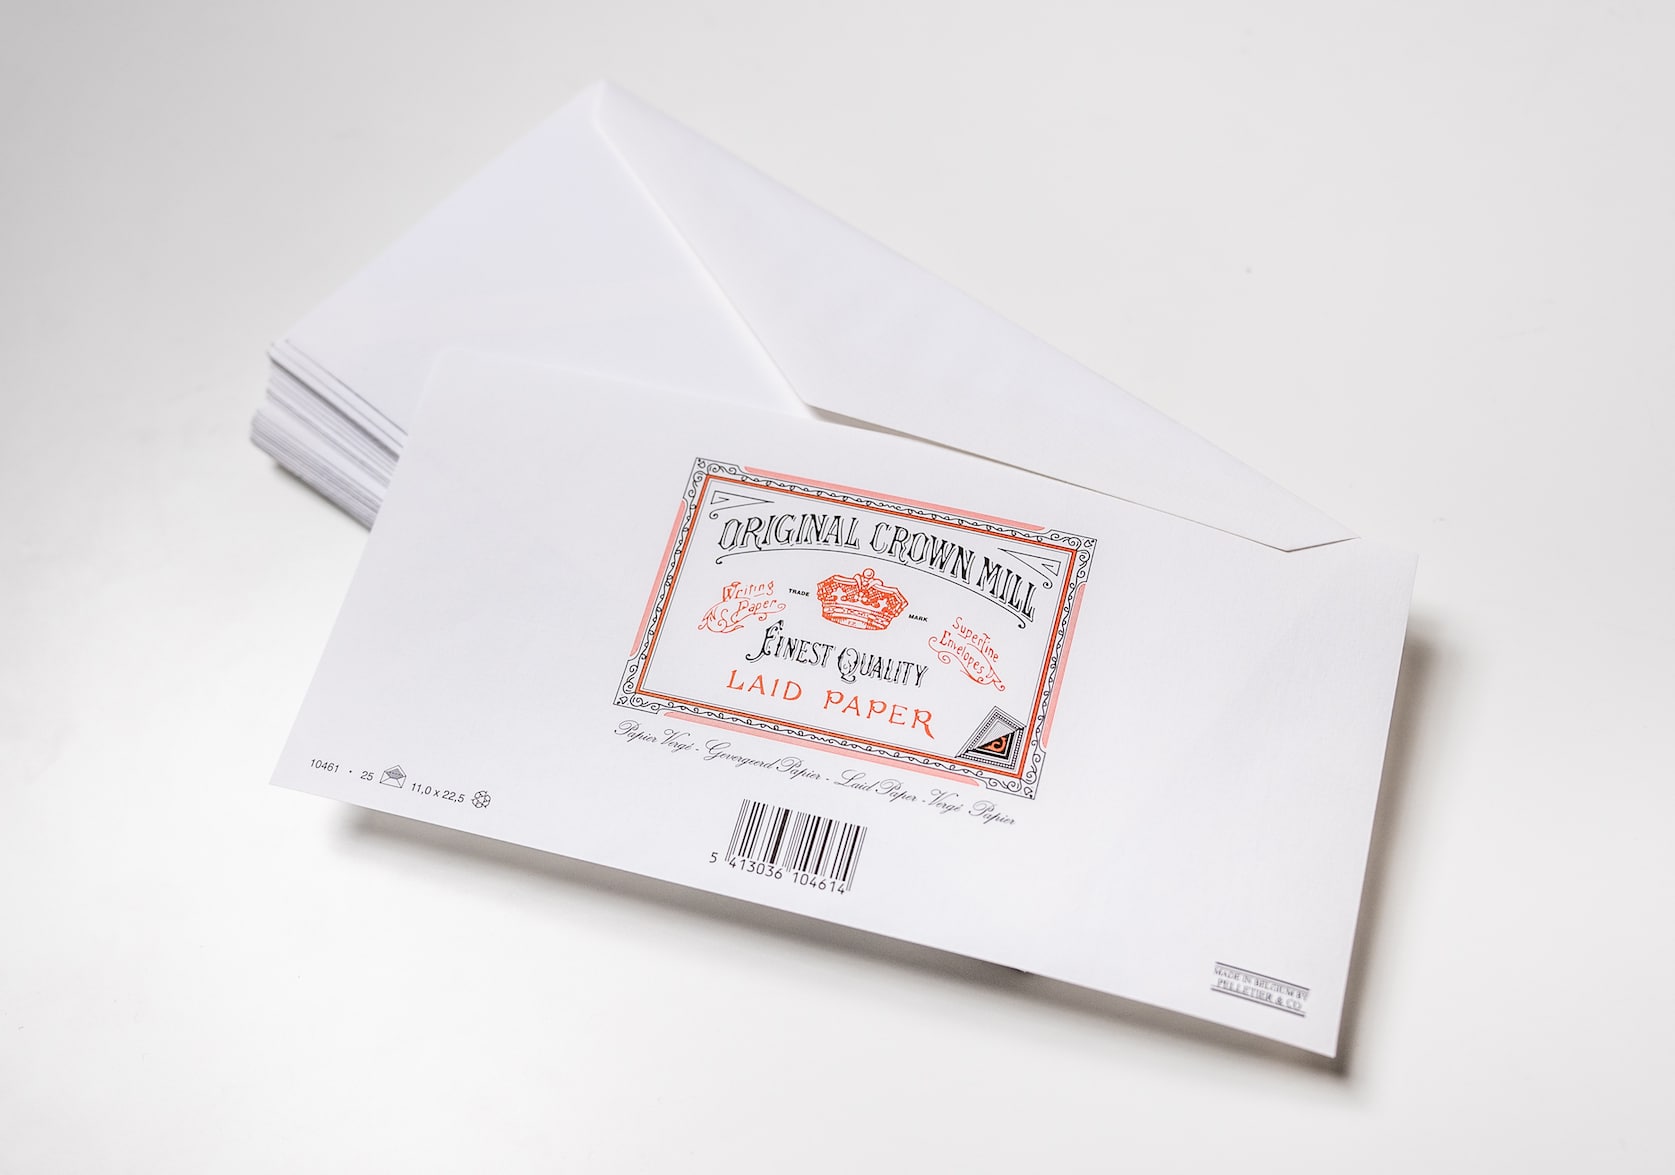 Stack of white laid envelopes for A4 Notepad. In the centre there is a stamped red & black logo with a red brown. Text that reads: Original Crown Mill. Finest Quality. Laid Paper. Below there is a black barcode.